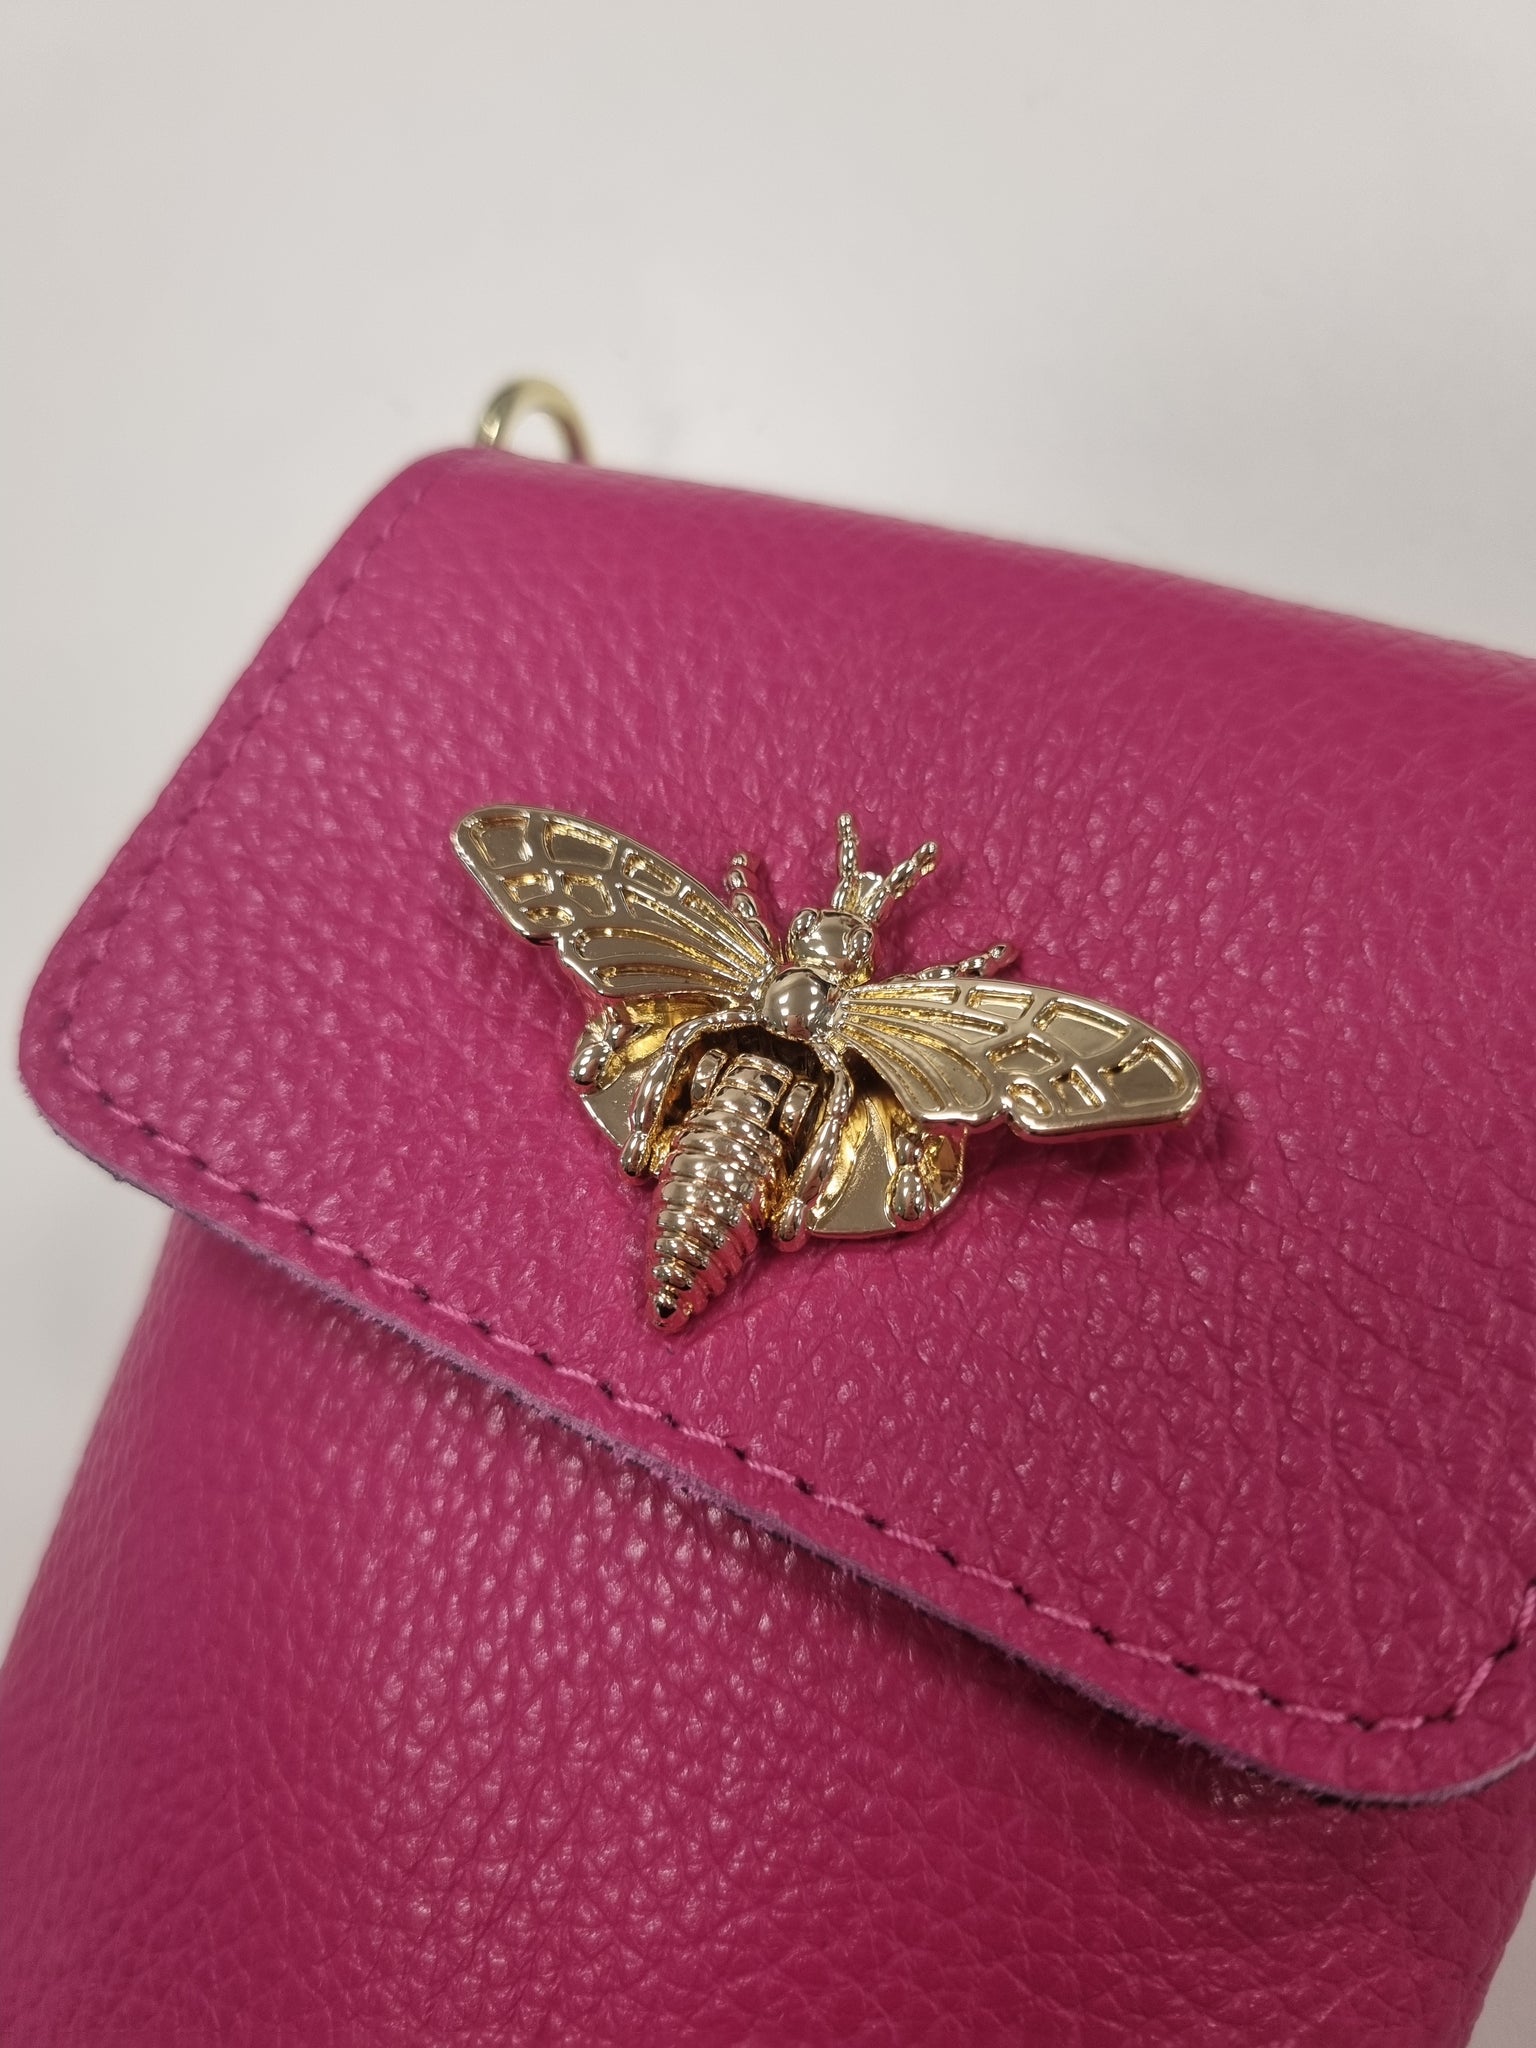 Leather Bee Phone Bag - Pink